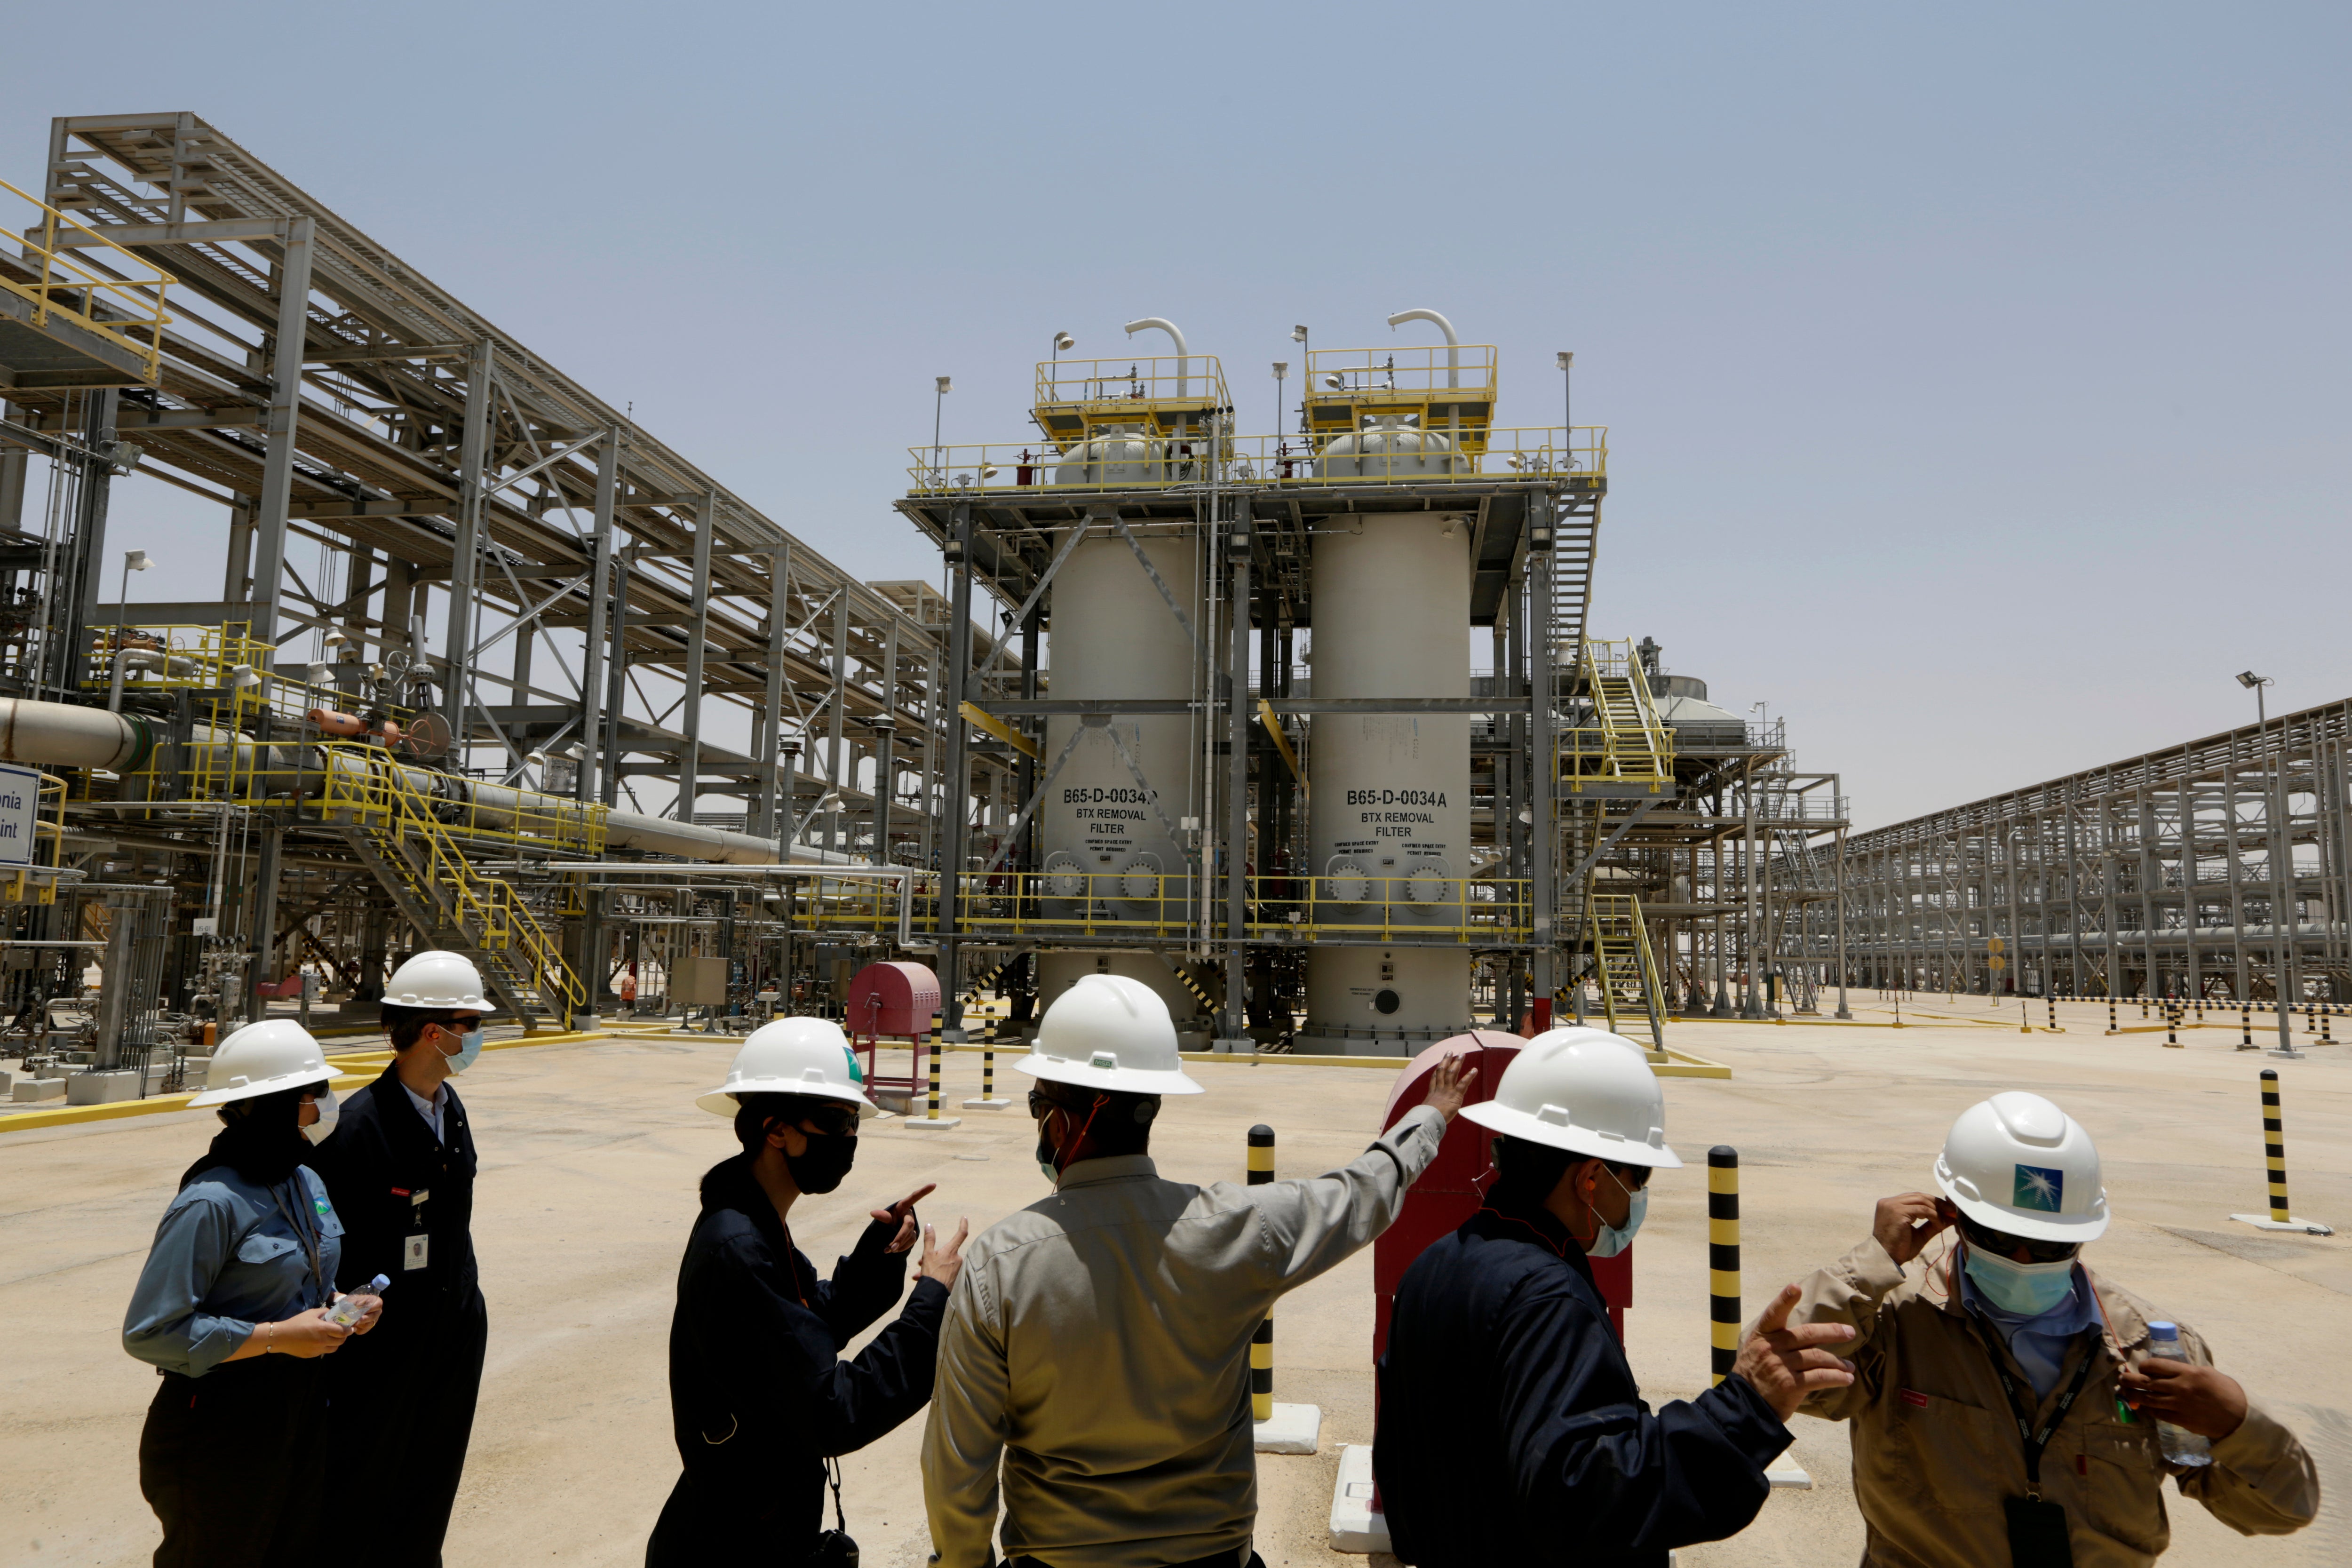 Aramco announced its profits were up 288% to $25.5bn